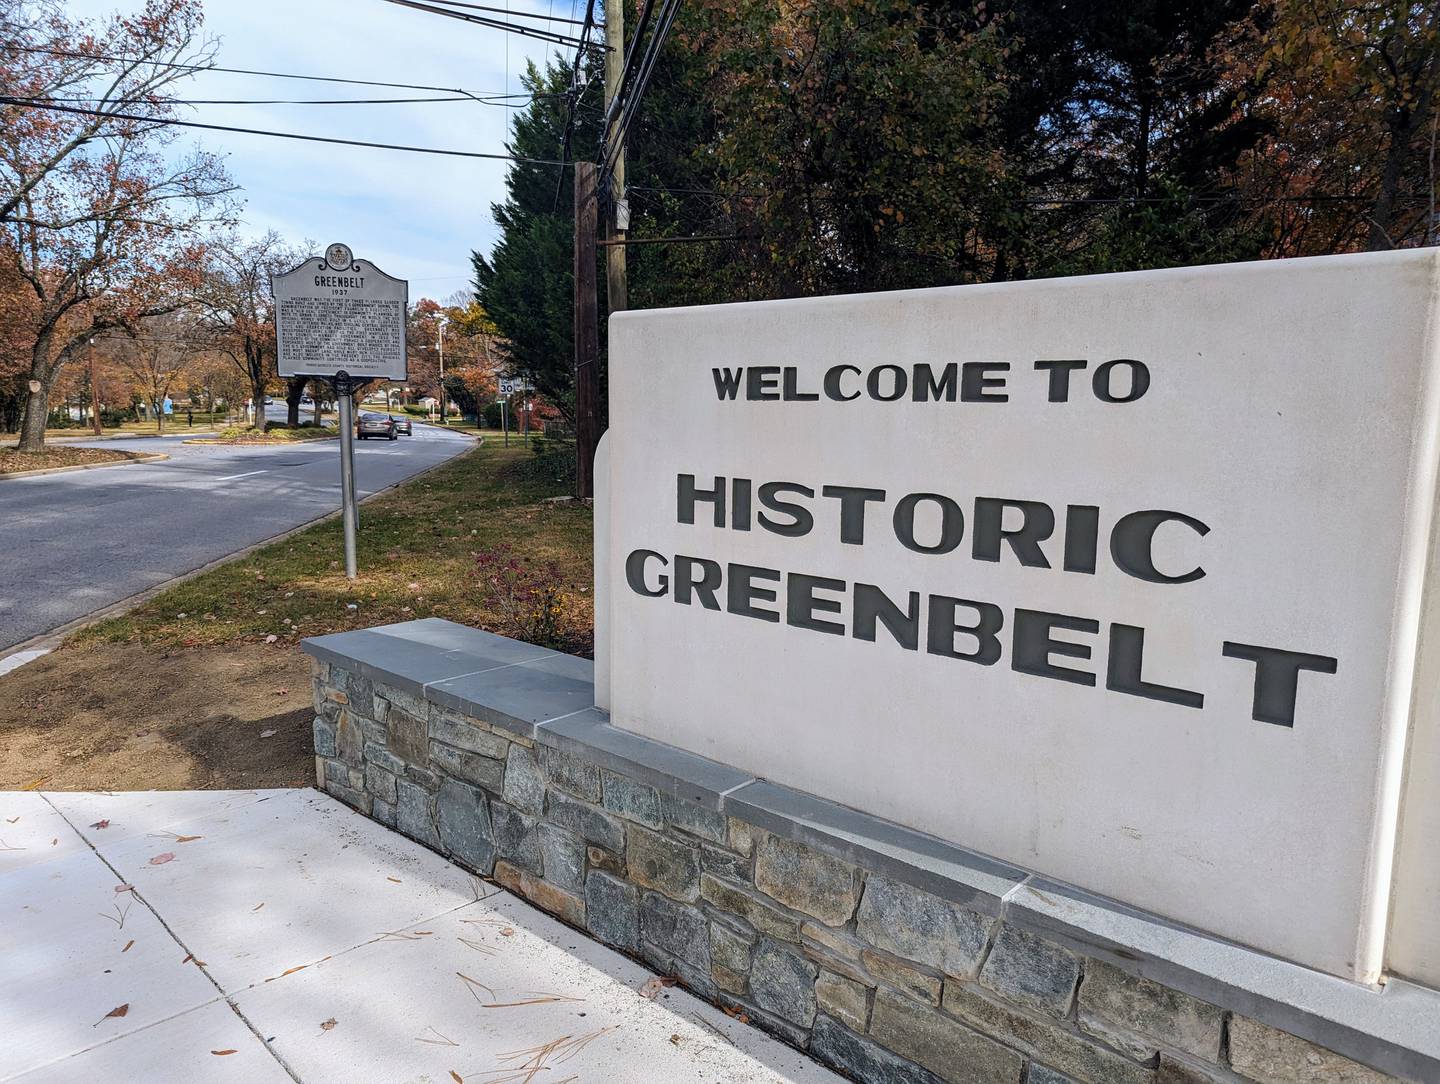 Created in the 1930s as part of a New Deal work and housing program, Greenbelt has a historic old town surrounded by more modern homes. The federal government has chosen it for the new FBI headquarters.